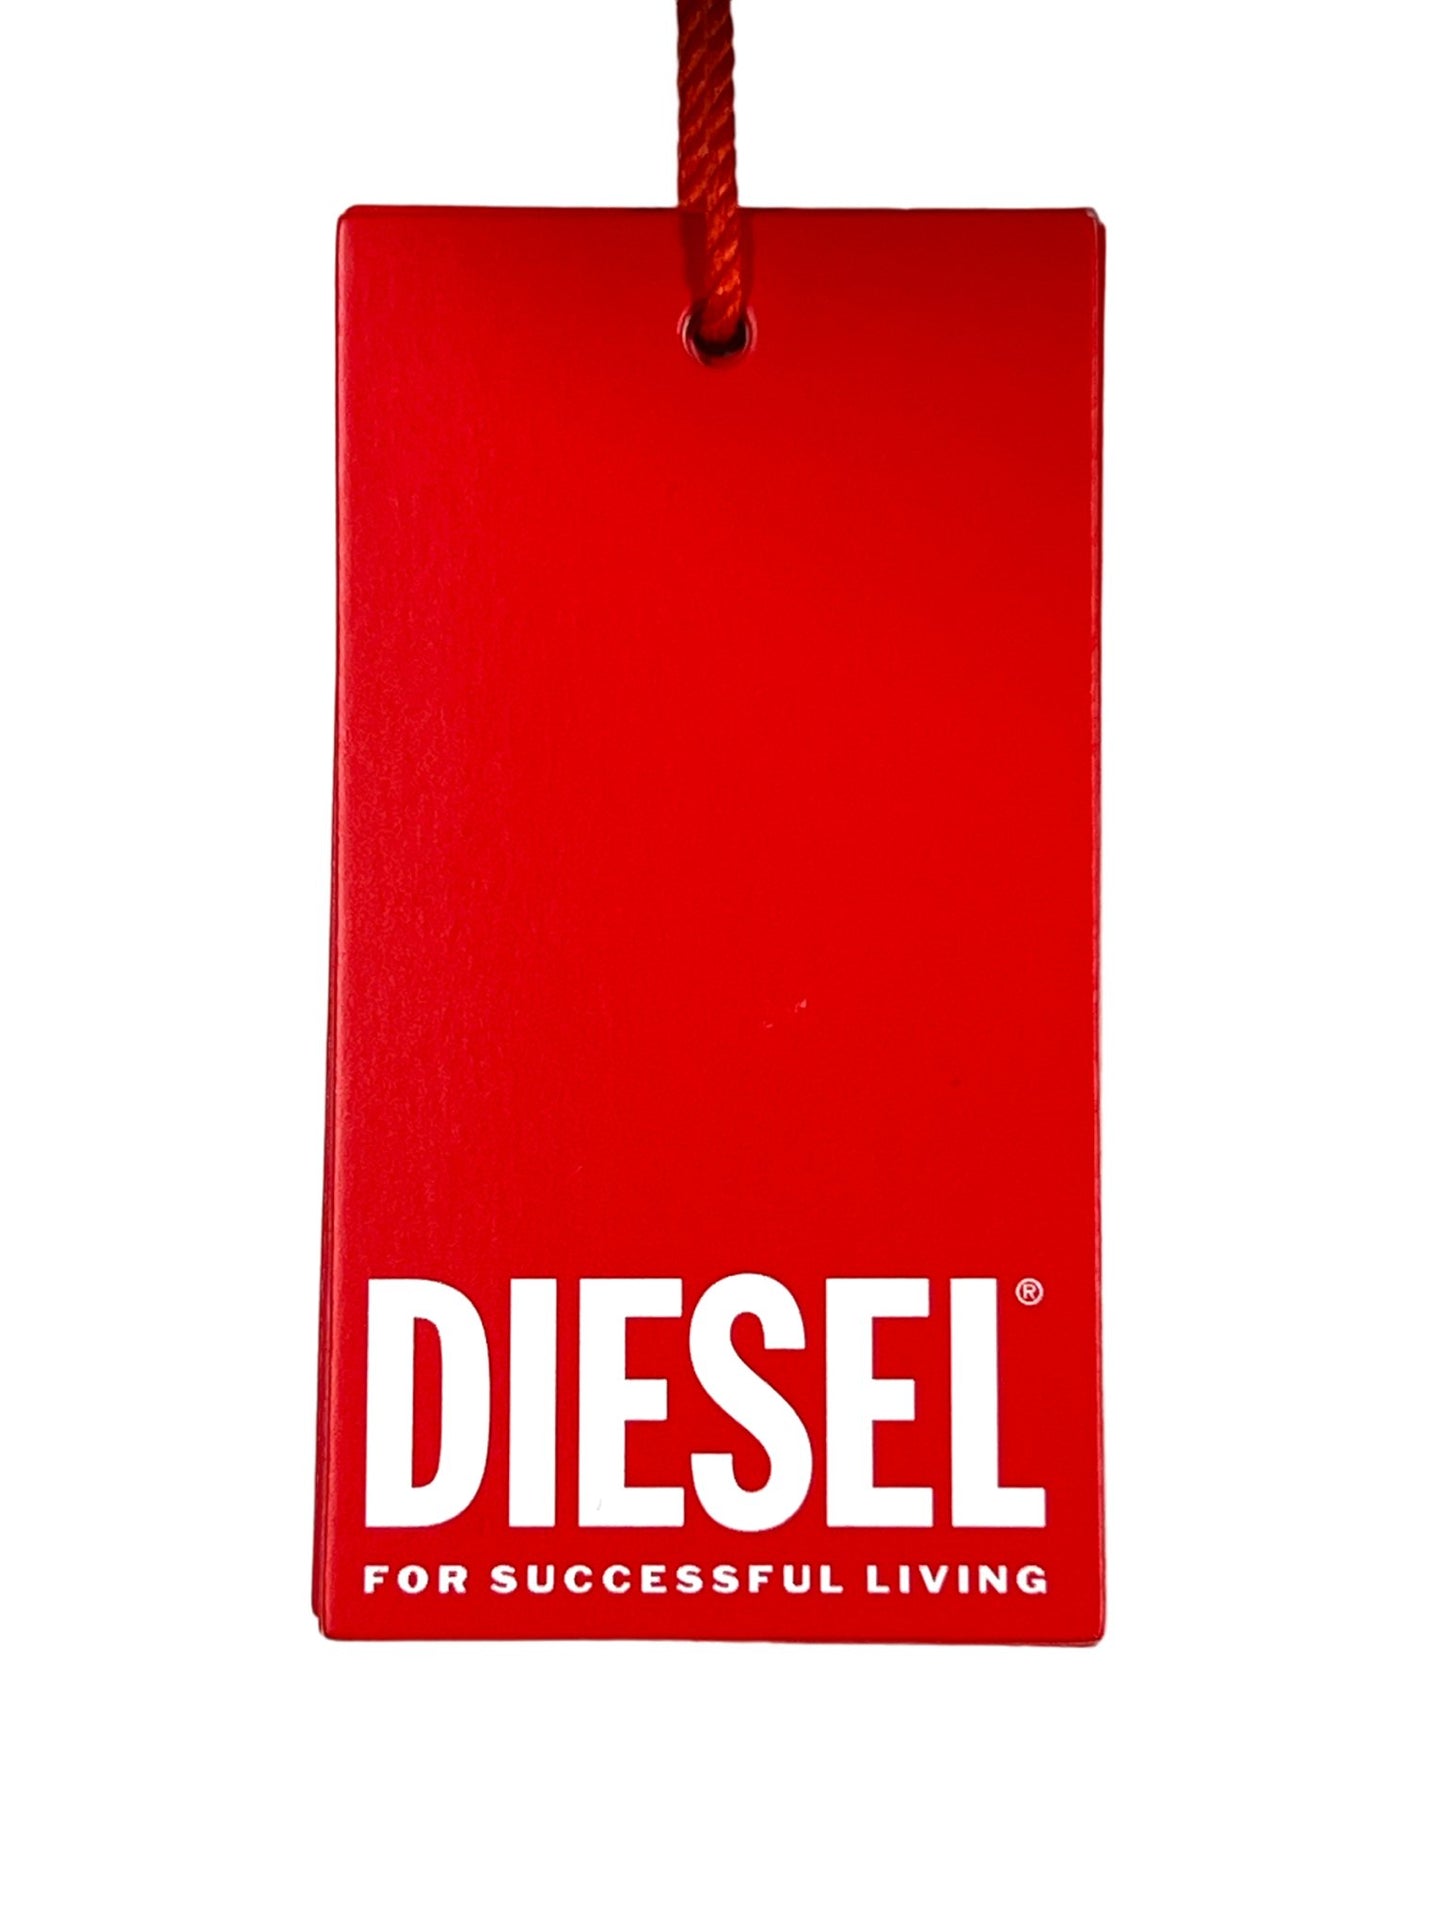 DIESEL T-JUST-N12 T-SHIRT OFF WHITE brand tag with the slogan "for successful living" against a black background on a men's T-shirt.